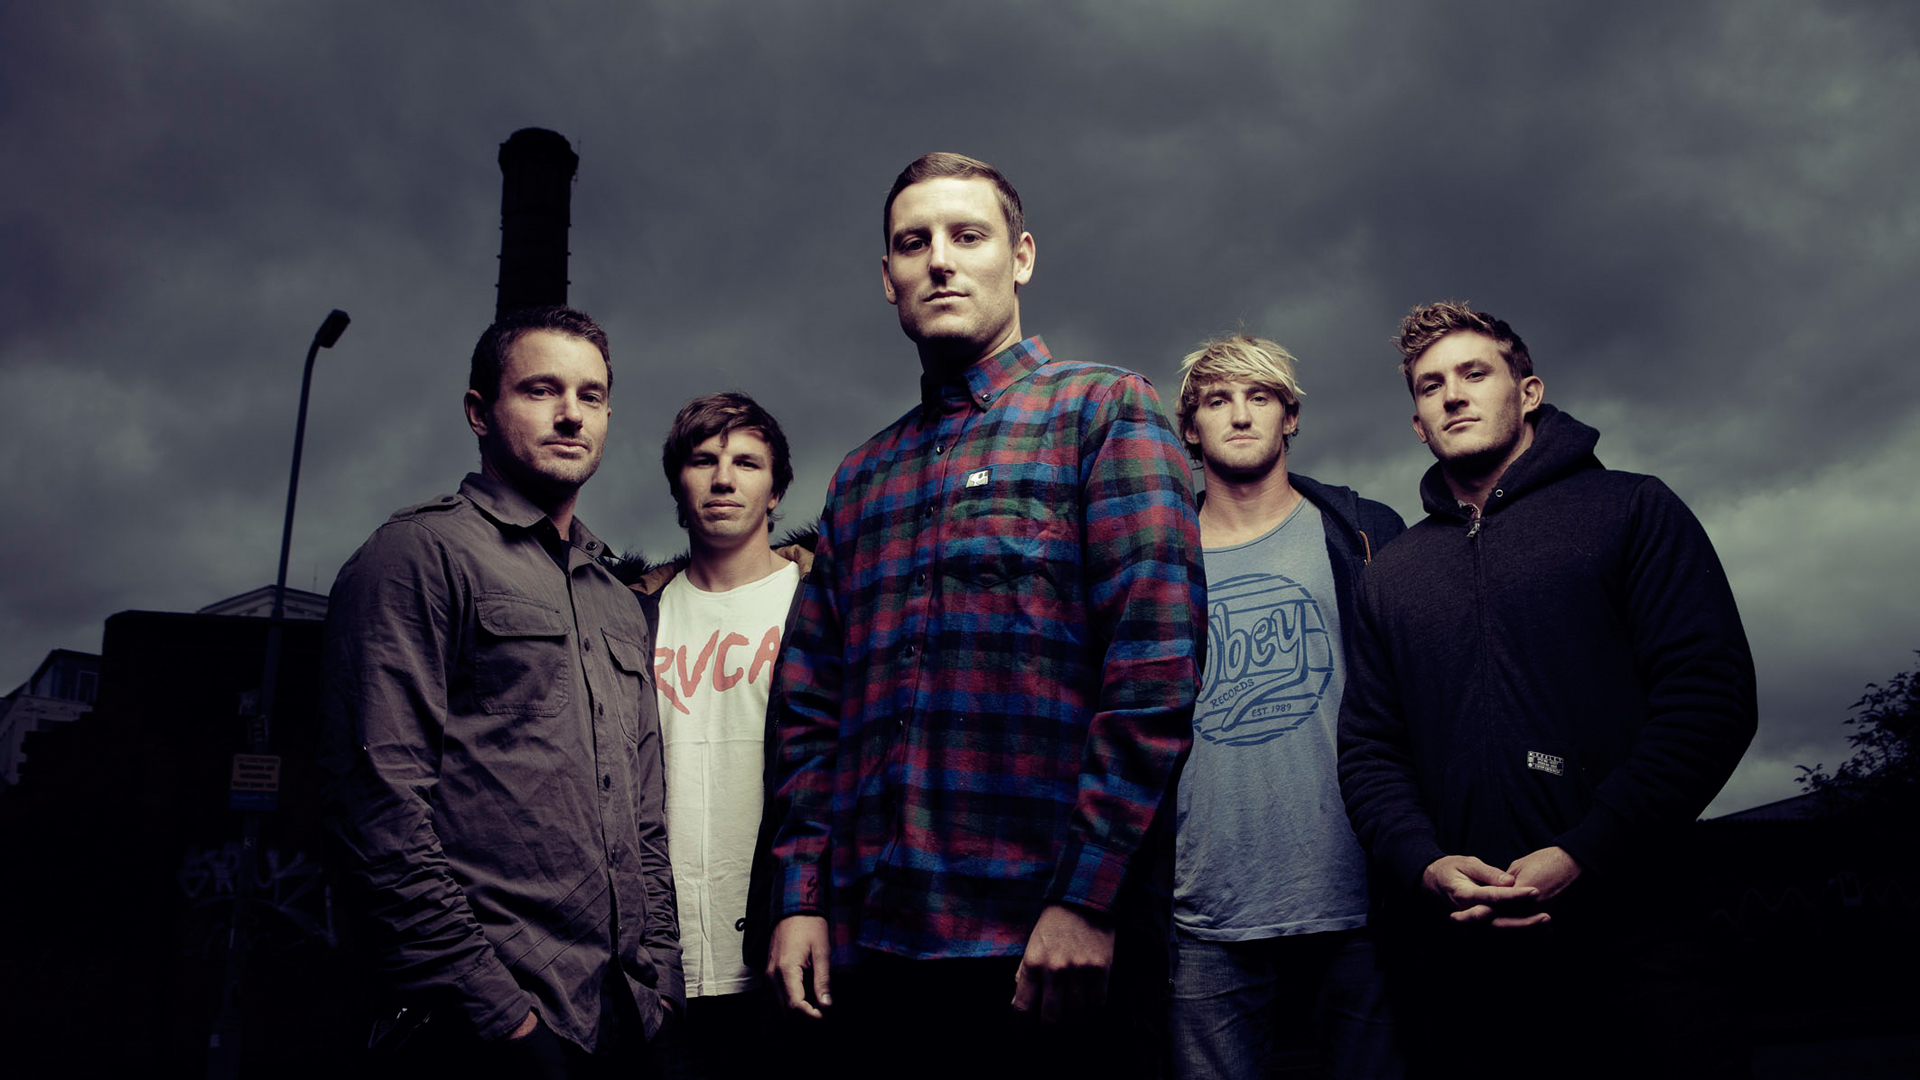 the parkway drive dvd torrent